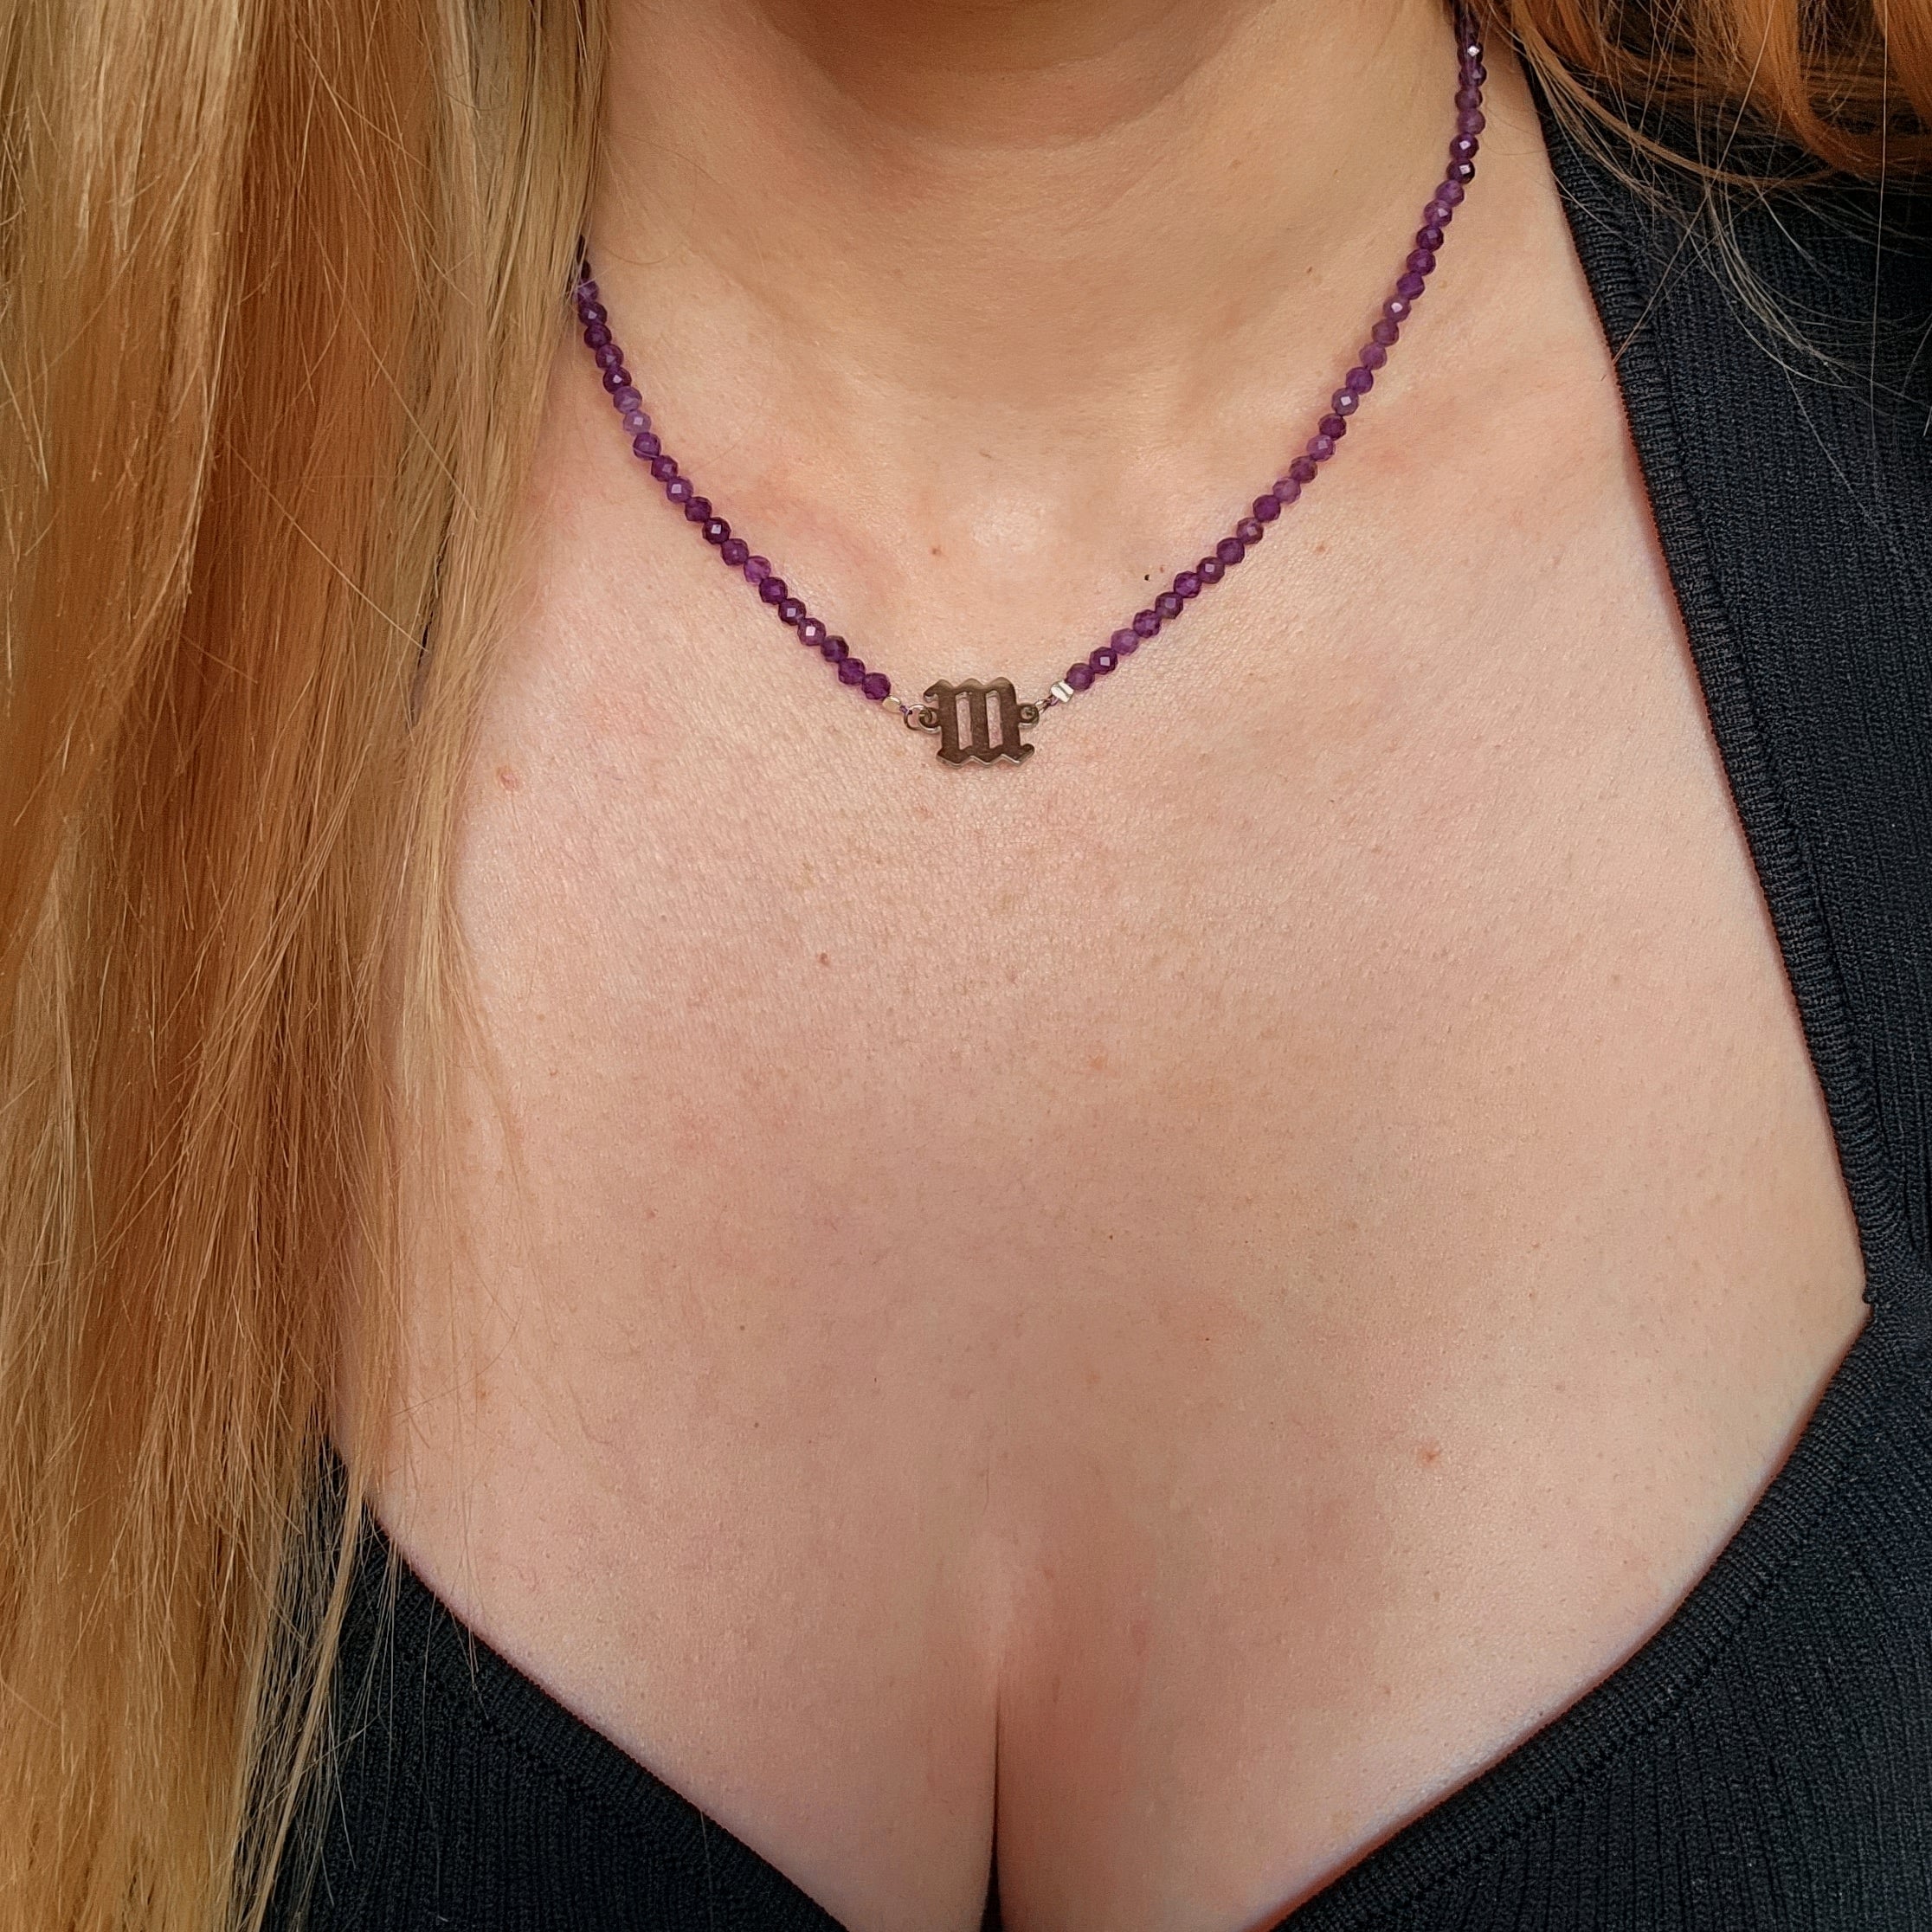 111 Angel Number Amethyst Micro Faceted Choker/Layering Necklace for Enhancing Intuition and Connecting with Source Energy